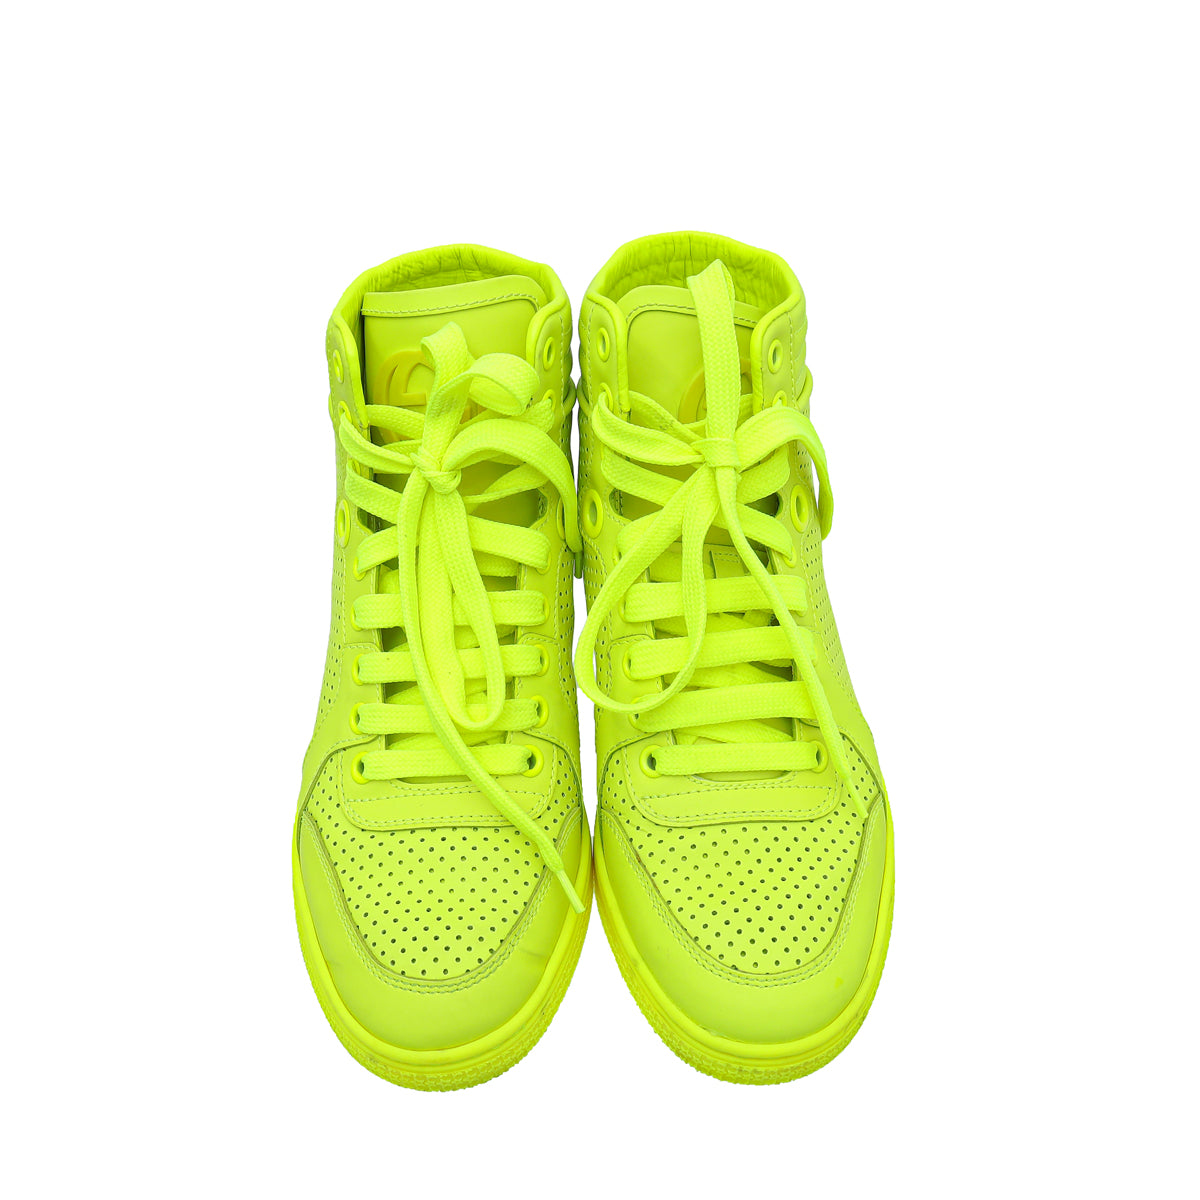 Gucci Neon Green Perforated High Top Sneaker 36